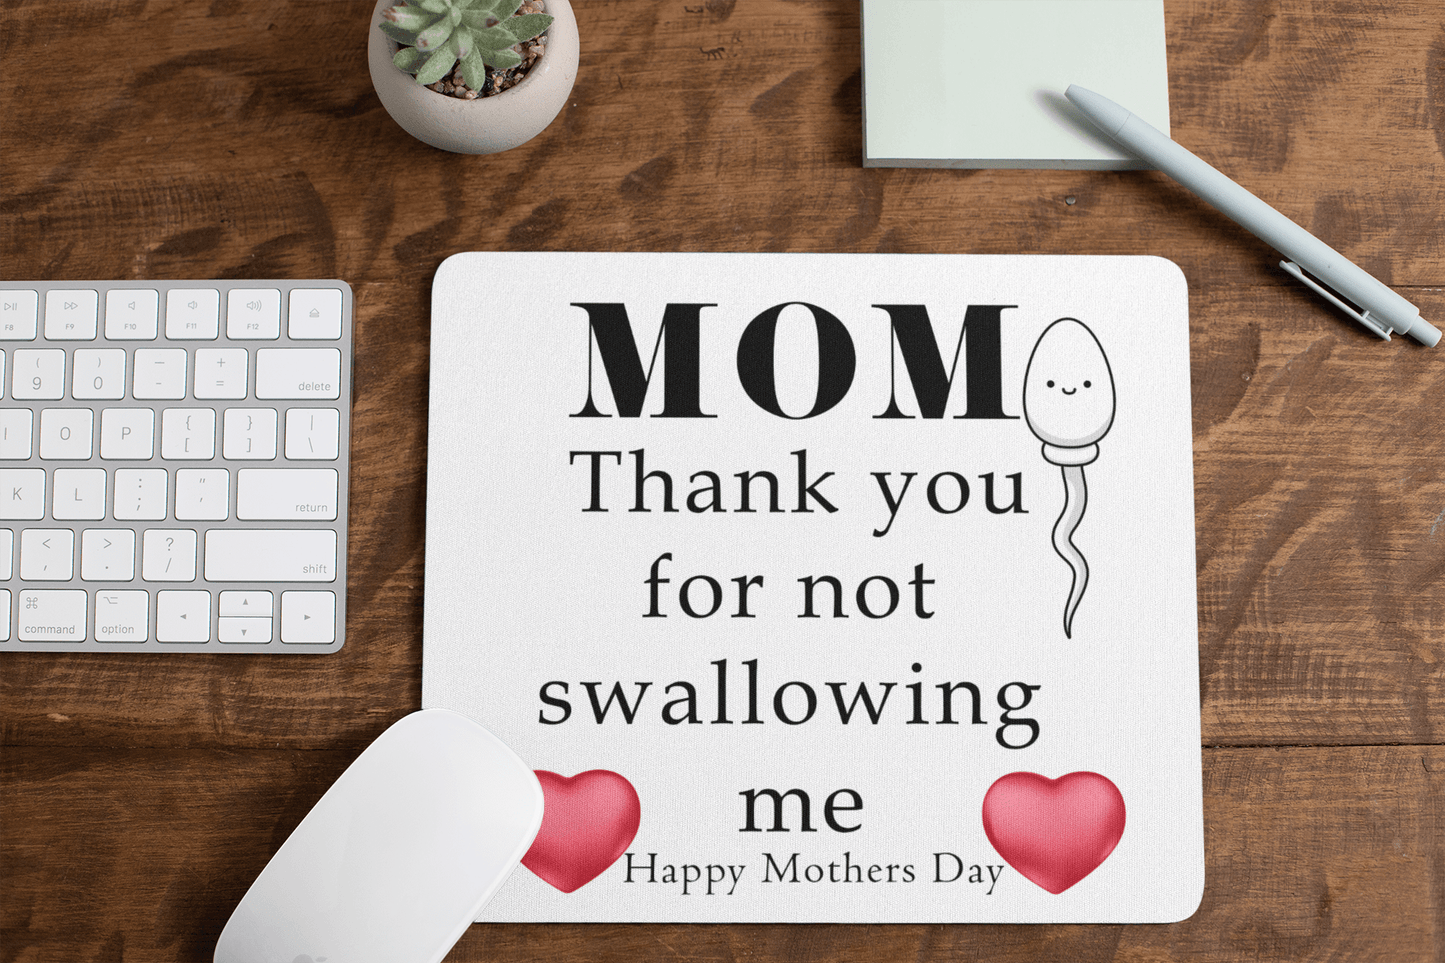 Mom, thank you for not swallowing me - Mouse pad blow job computer funny mothers day gift for mom mom moms day moms gift mothers day mouse mouse pad swallow